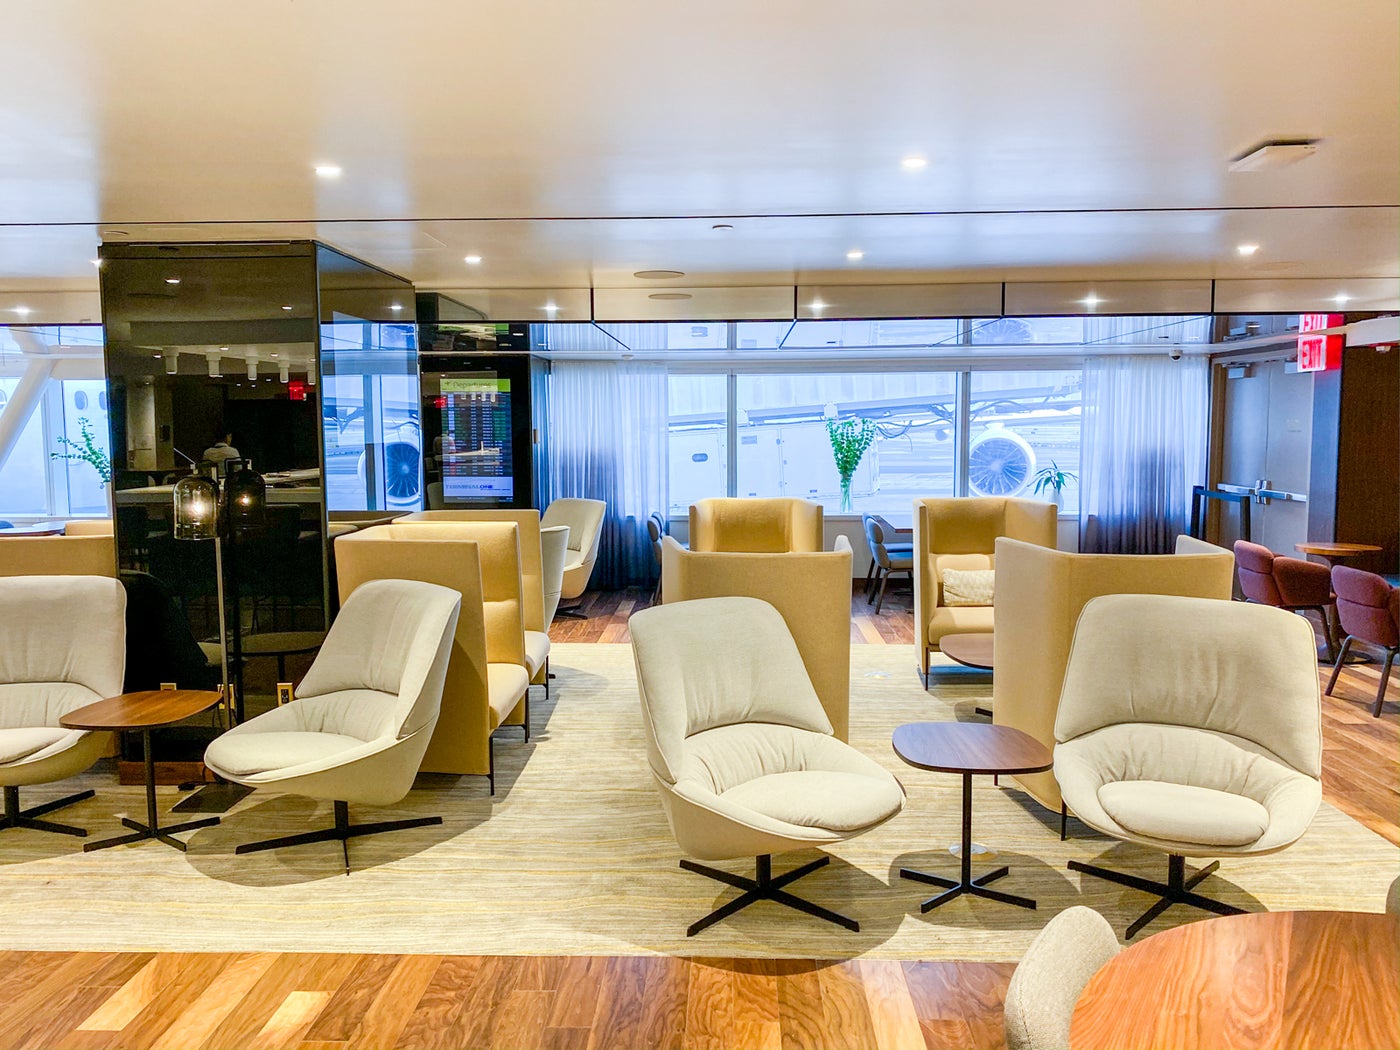 2 New Lounges At Jfk Are Now Accepting Priority Pass Members